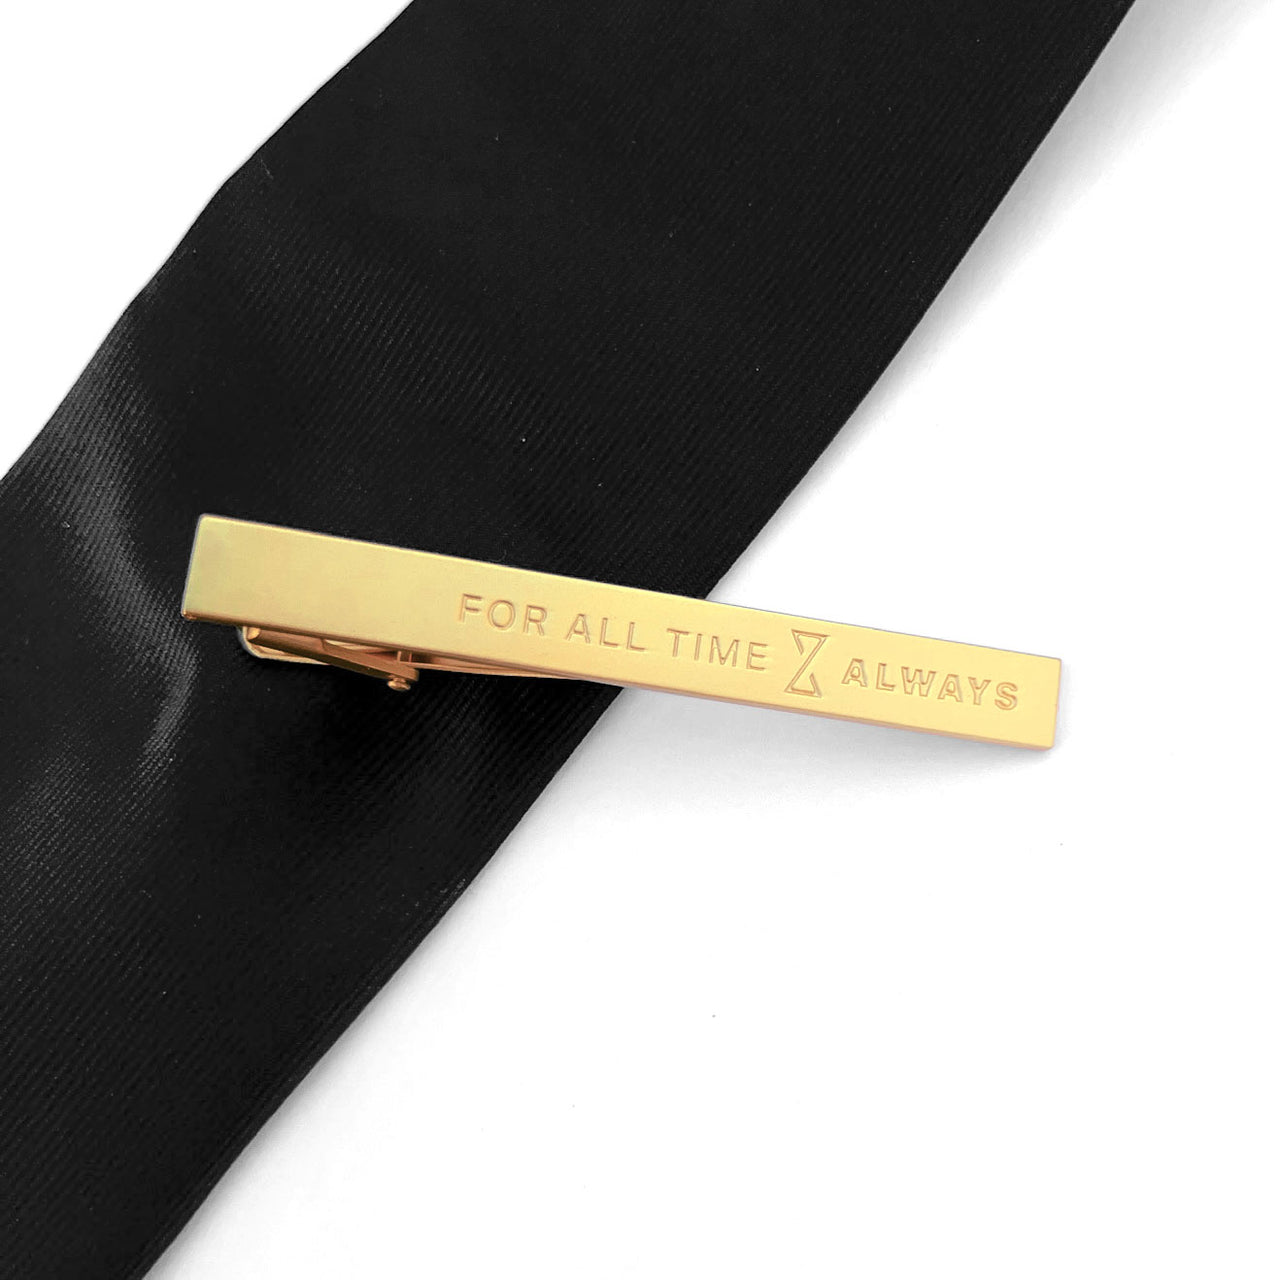 For All Time Tie Bar